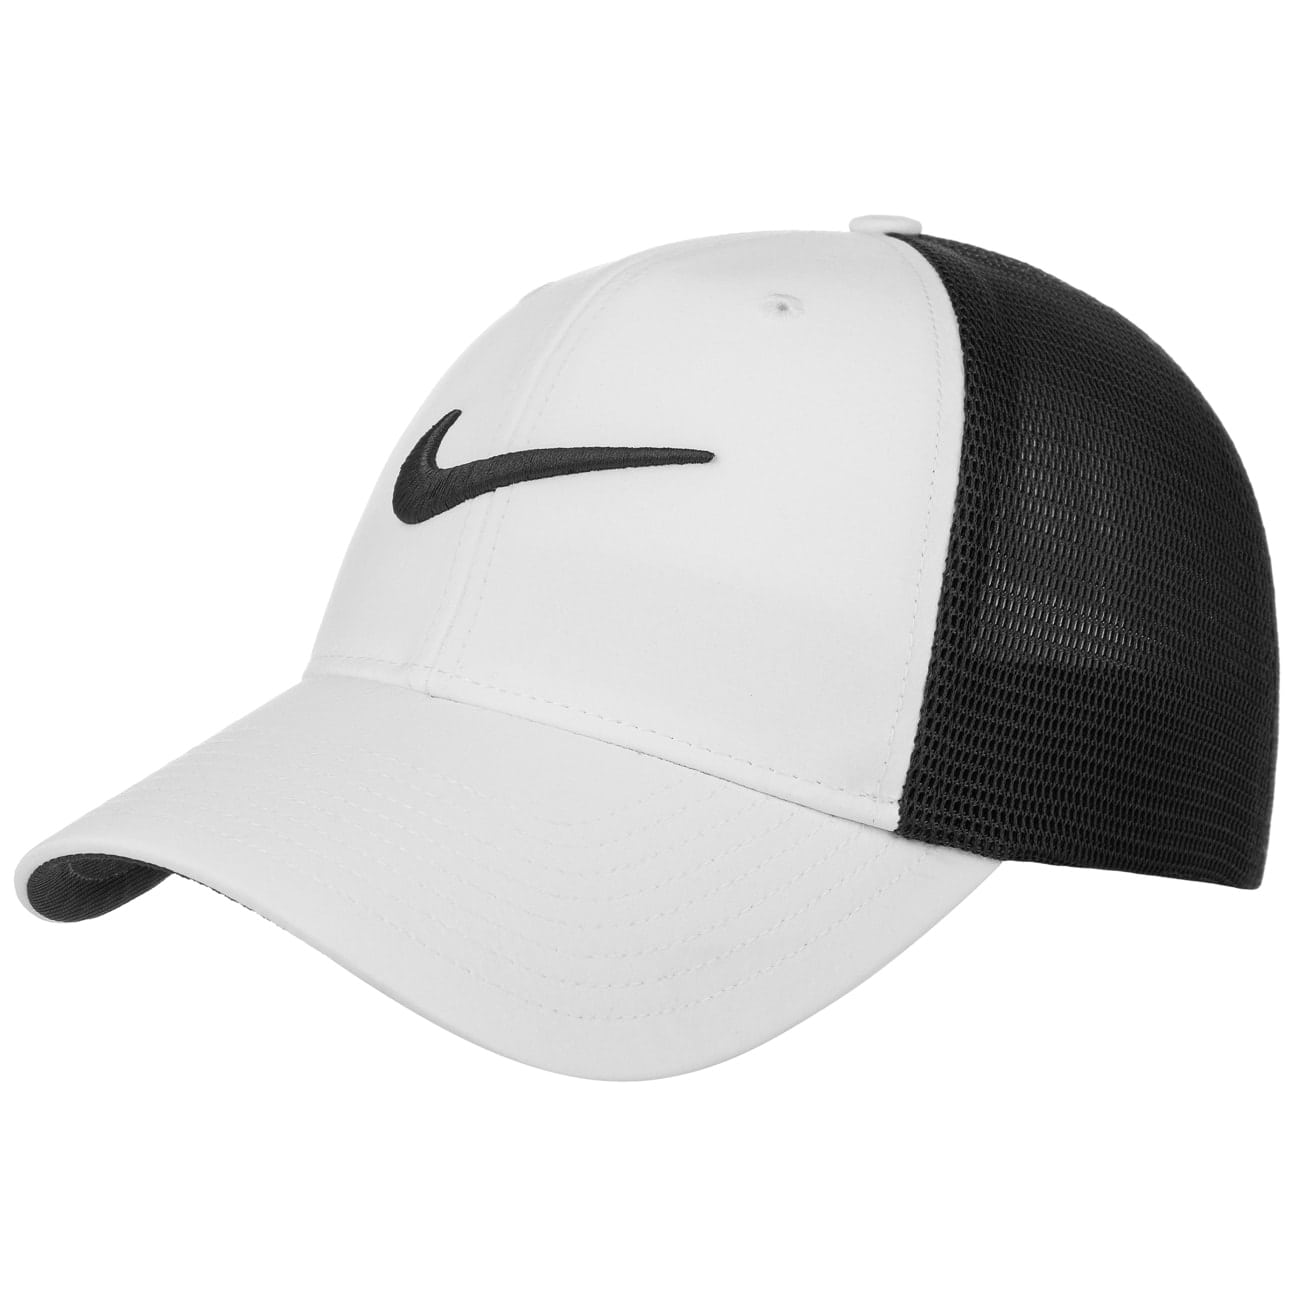 Legacy91 Flexfit Mesh Fitted Cap by Nike - 37,95